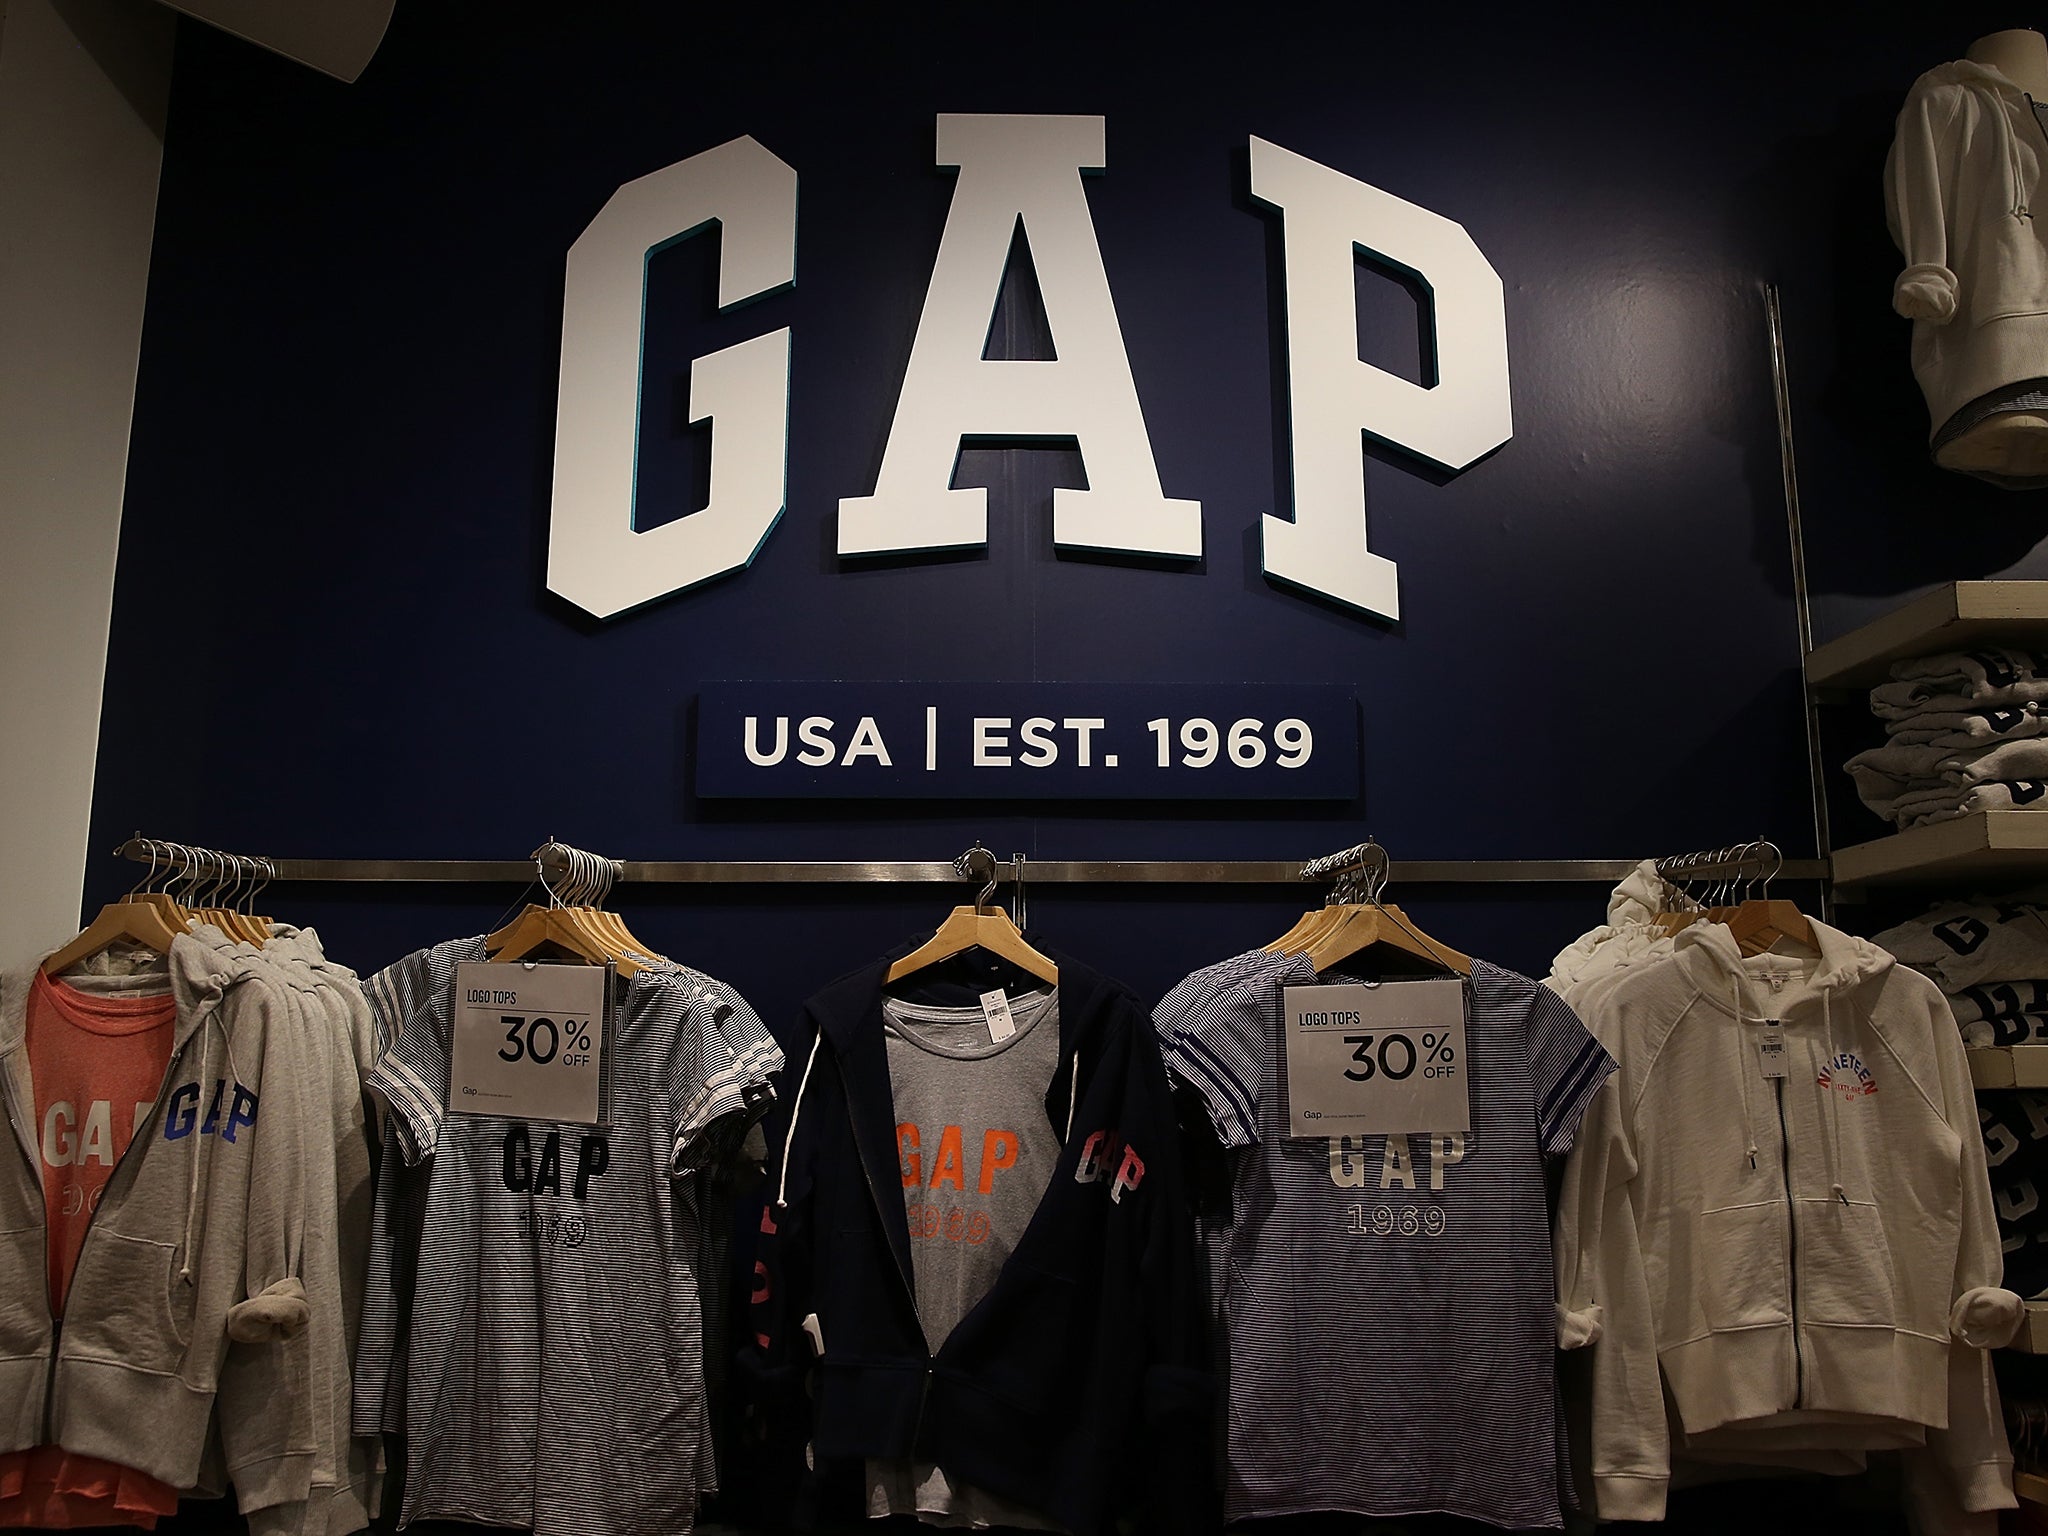 Gap Inc announced plans to close 175 Gap stores, almost a quarter of its total US footprint